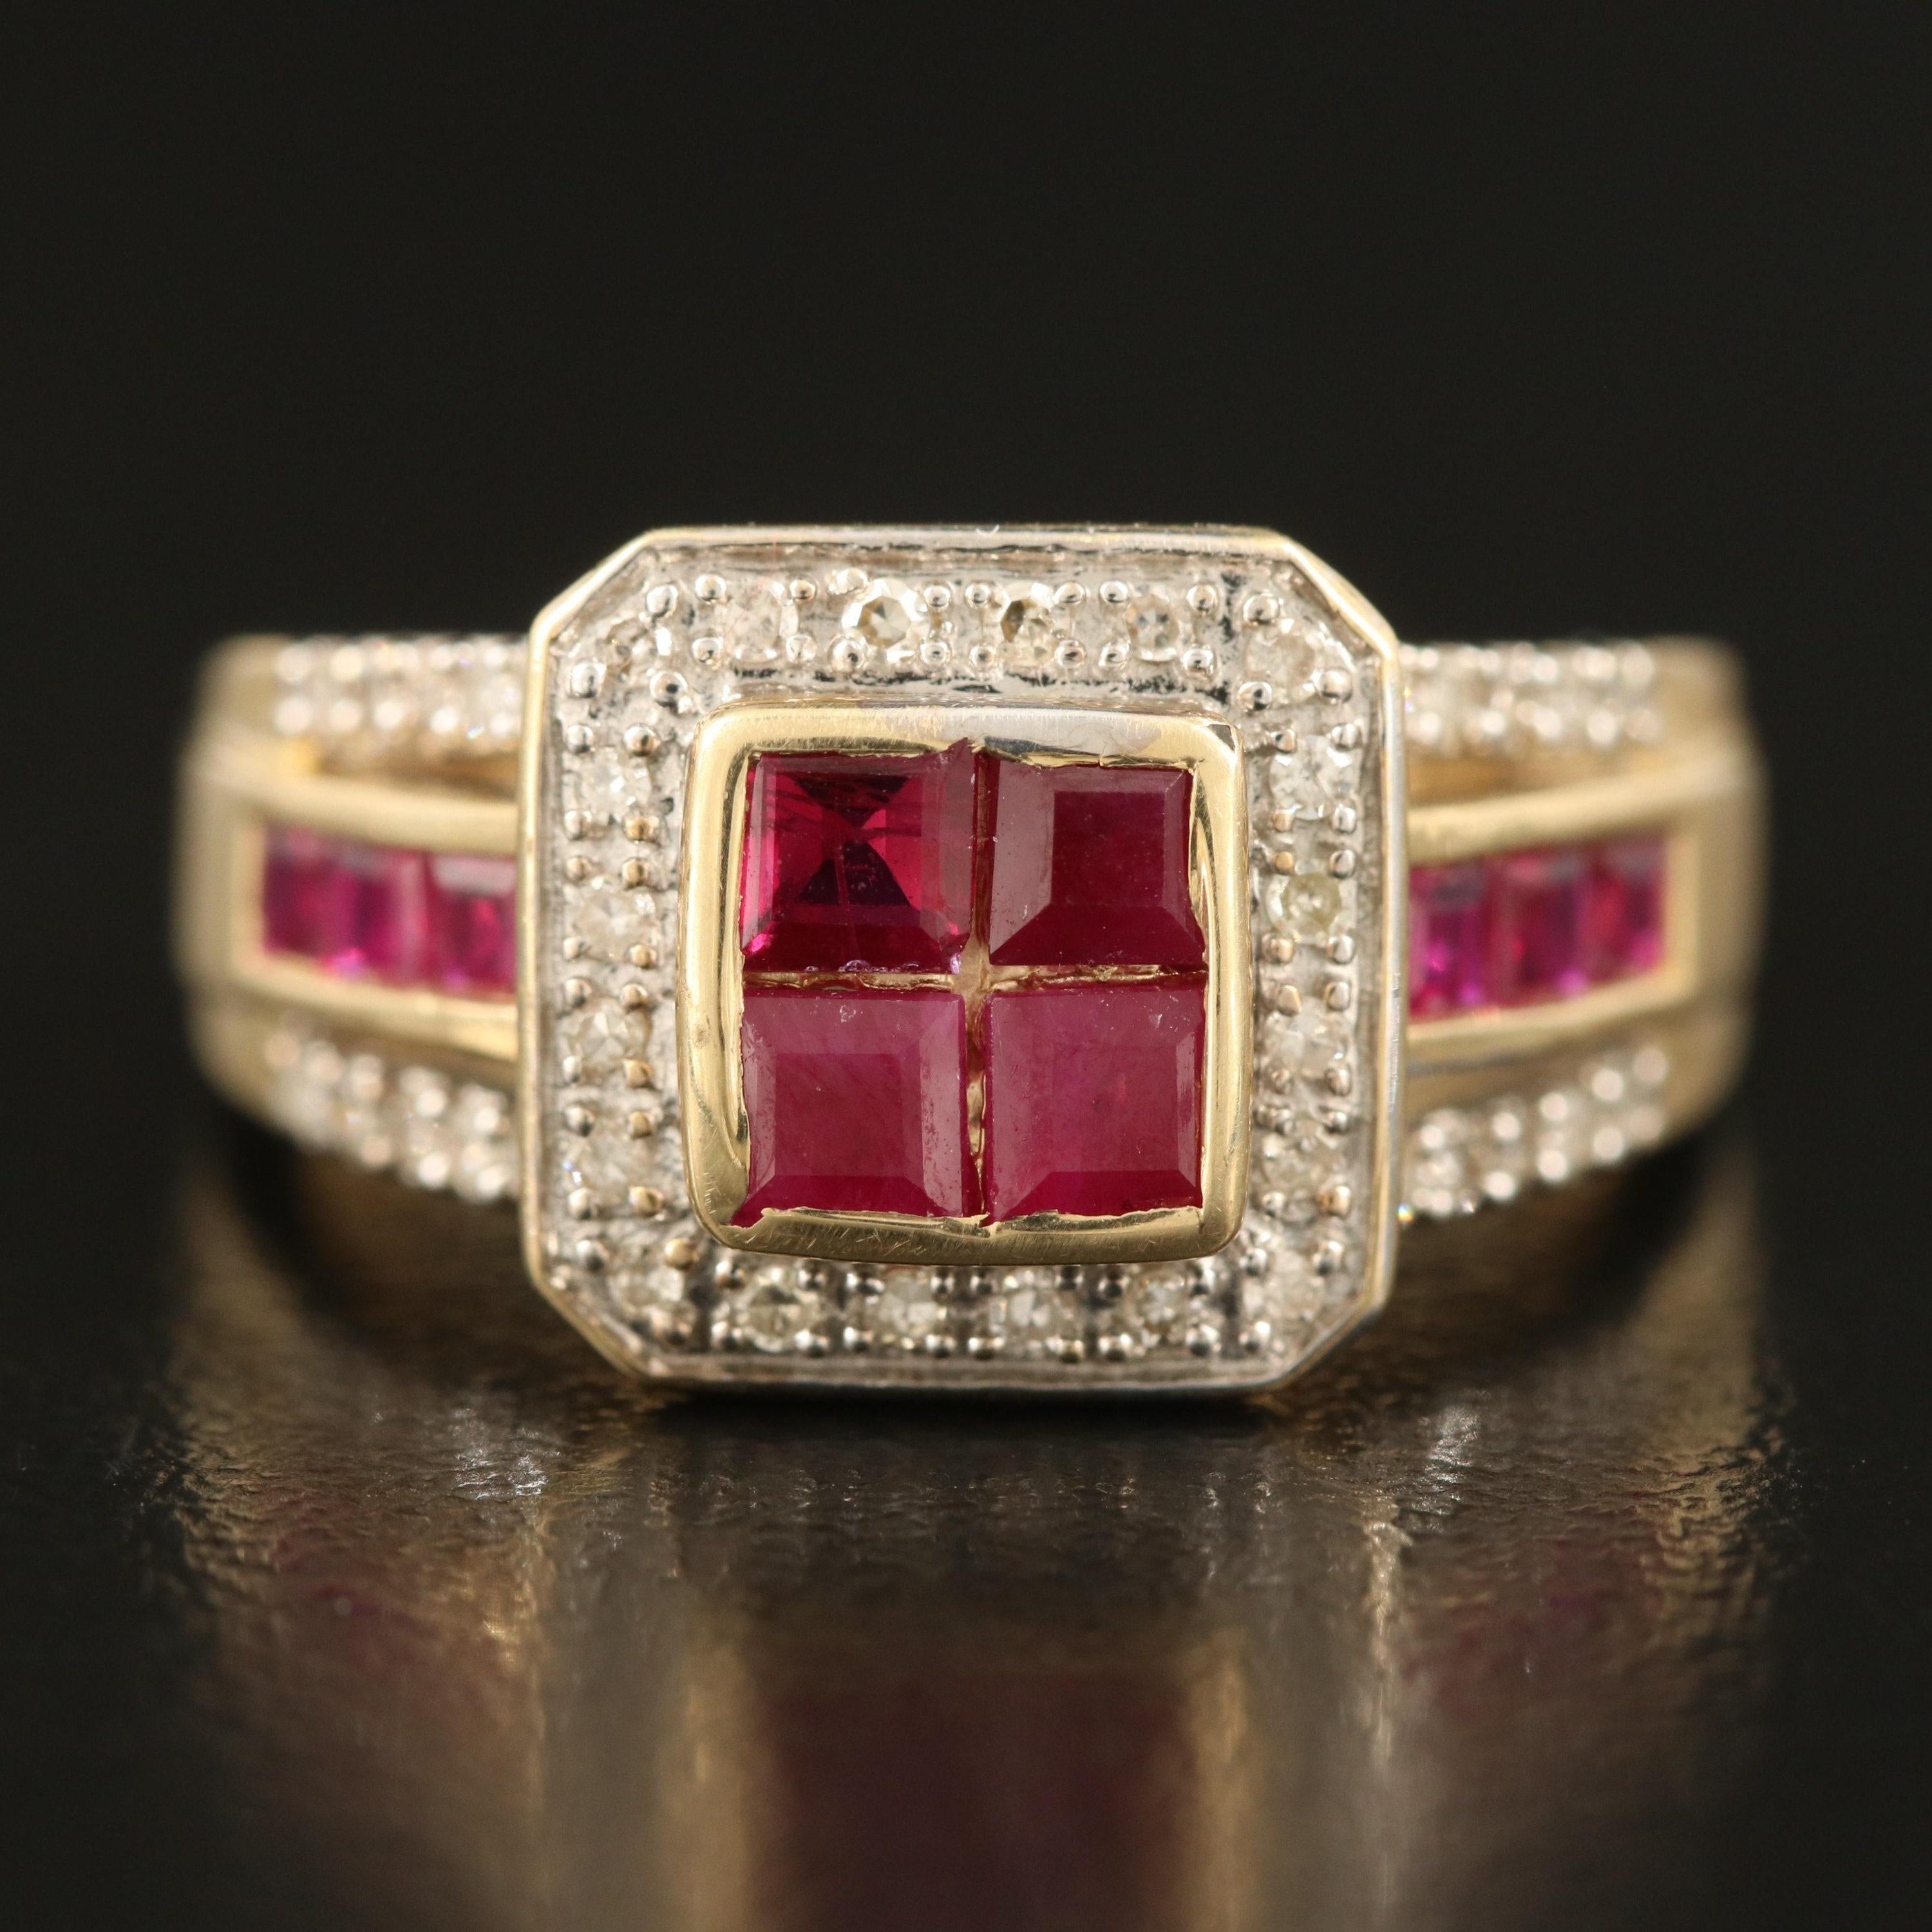 For Sale:  Art Deco Natural Ruby Diamond Engagement Ring Set in 18K Gold, Cocktail Ring 6